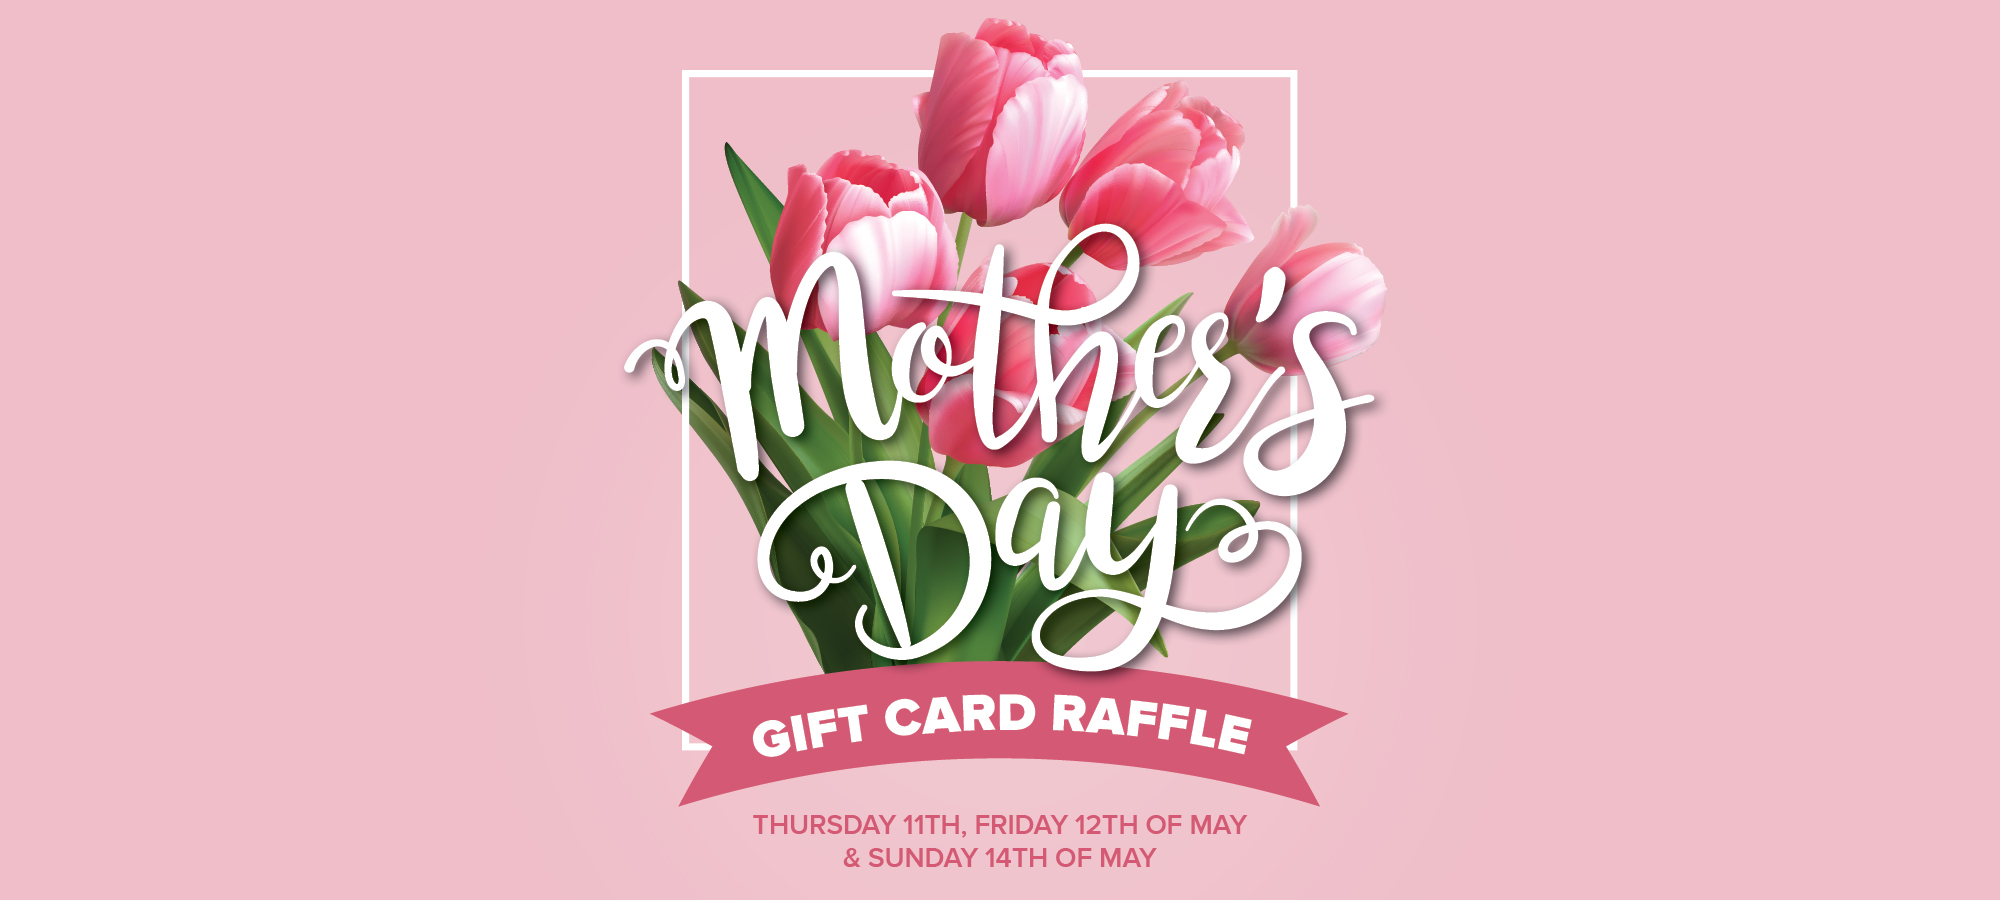 Mother’s Day Gift Card Raffle